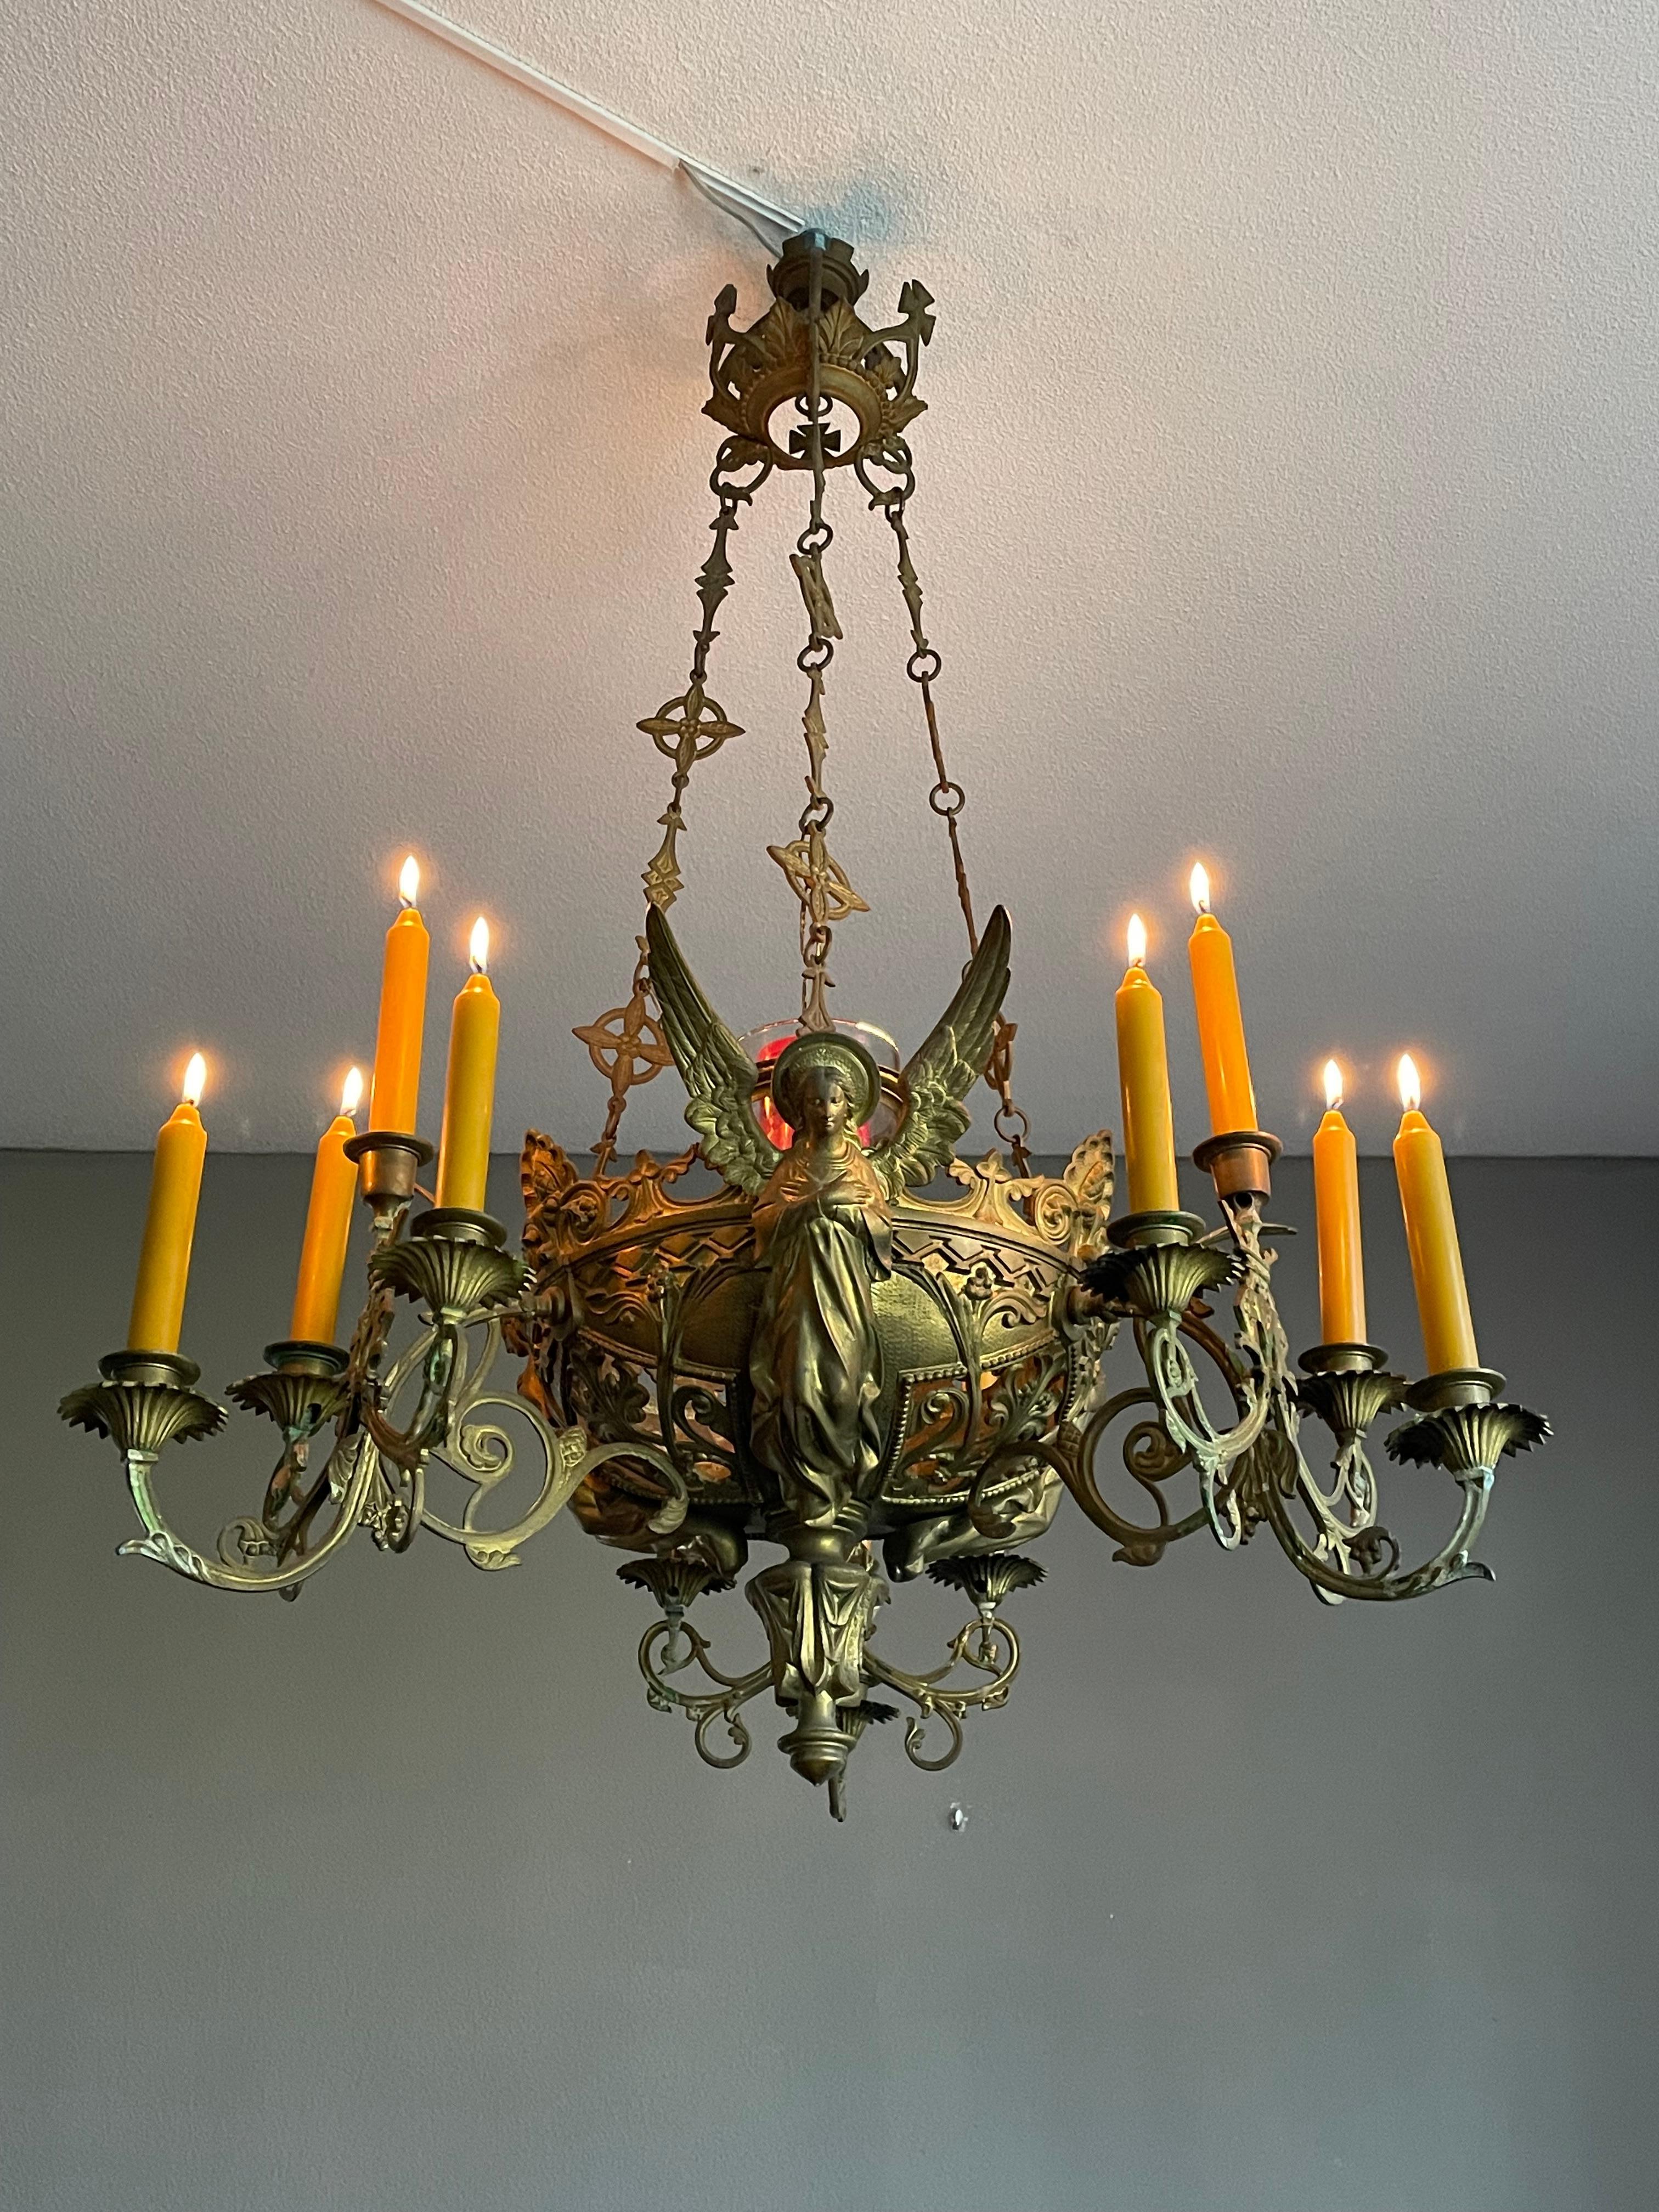 Glass Bronze Gothic Revival Candle Chandelier w. Virgin Mary & Marian Cross Sculptures For Sale